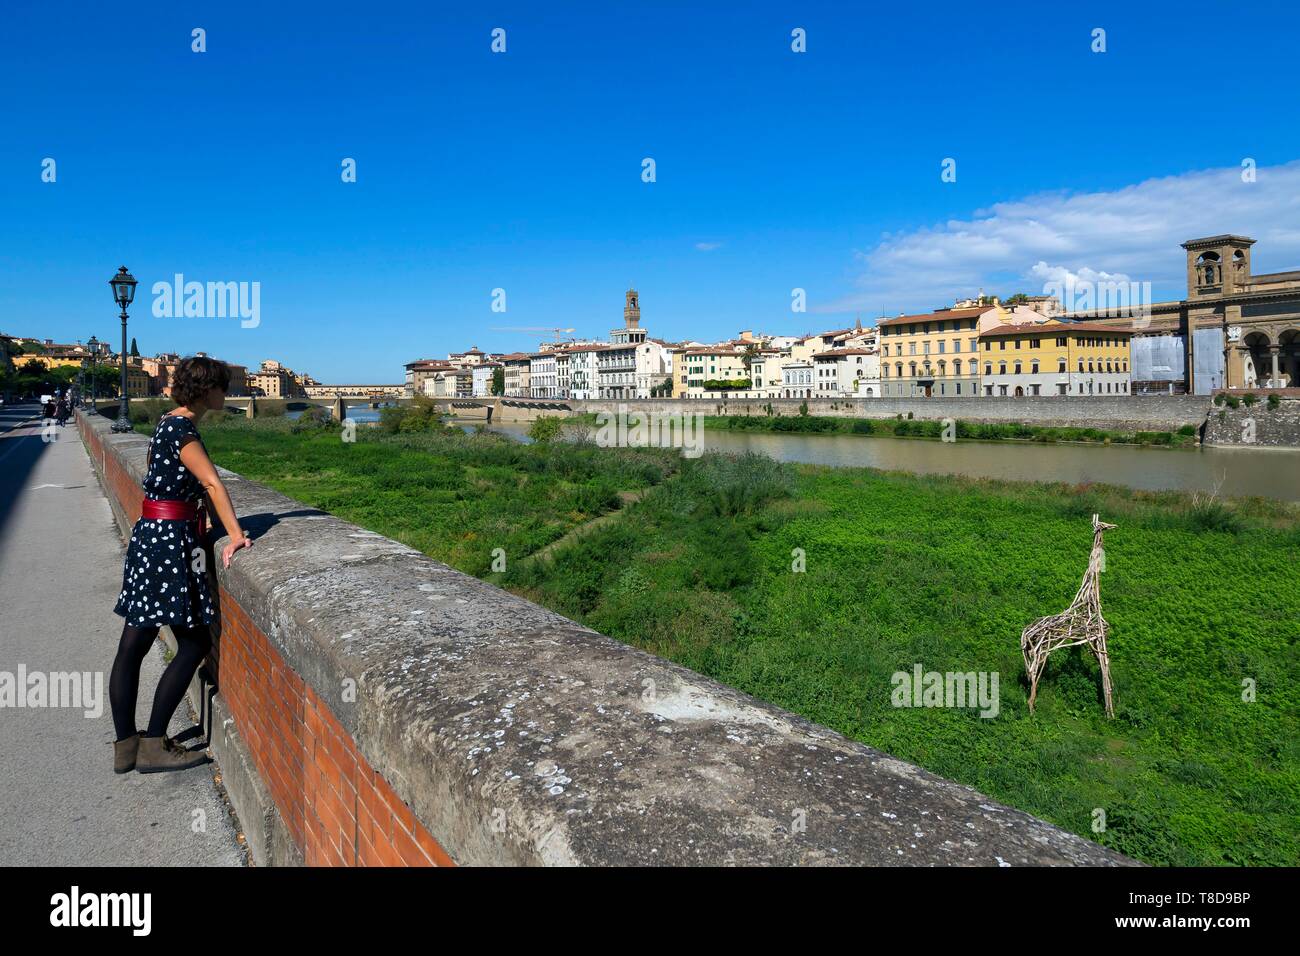 Italy, Tuscany, Florence, historic centre listed as World Heritage by UNESCO, the banks of the Arno with a giraffe wood sculpture Stock Photo